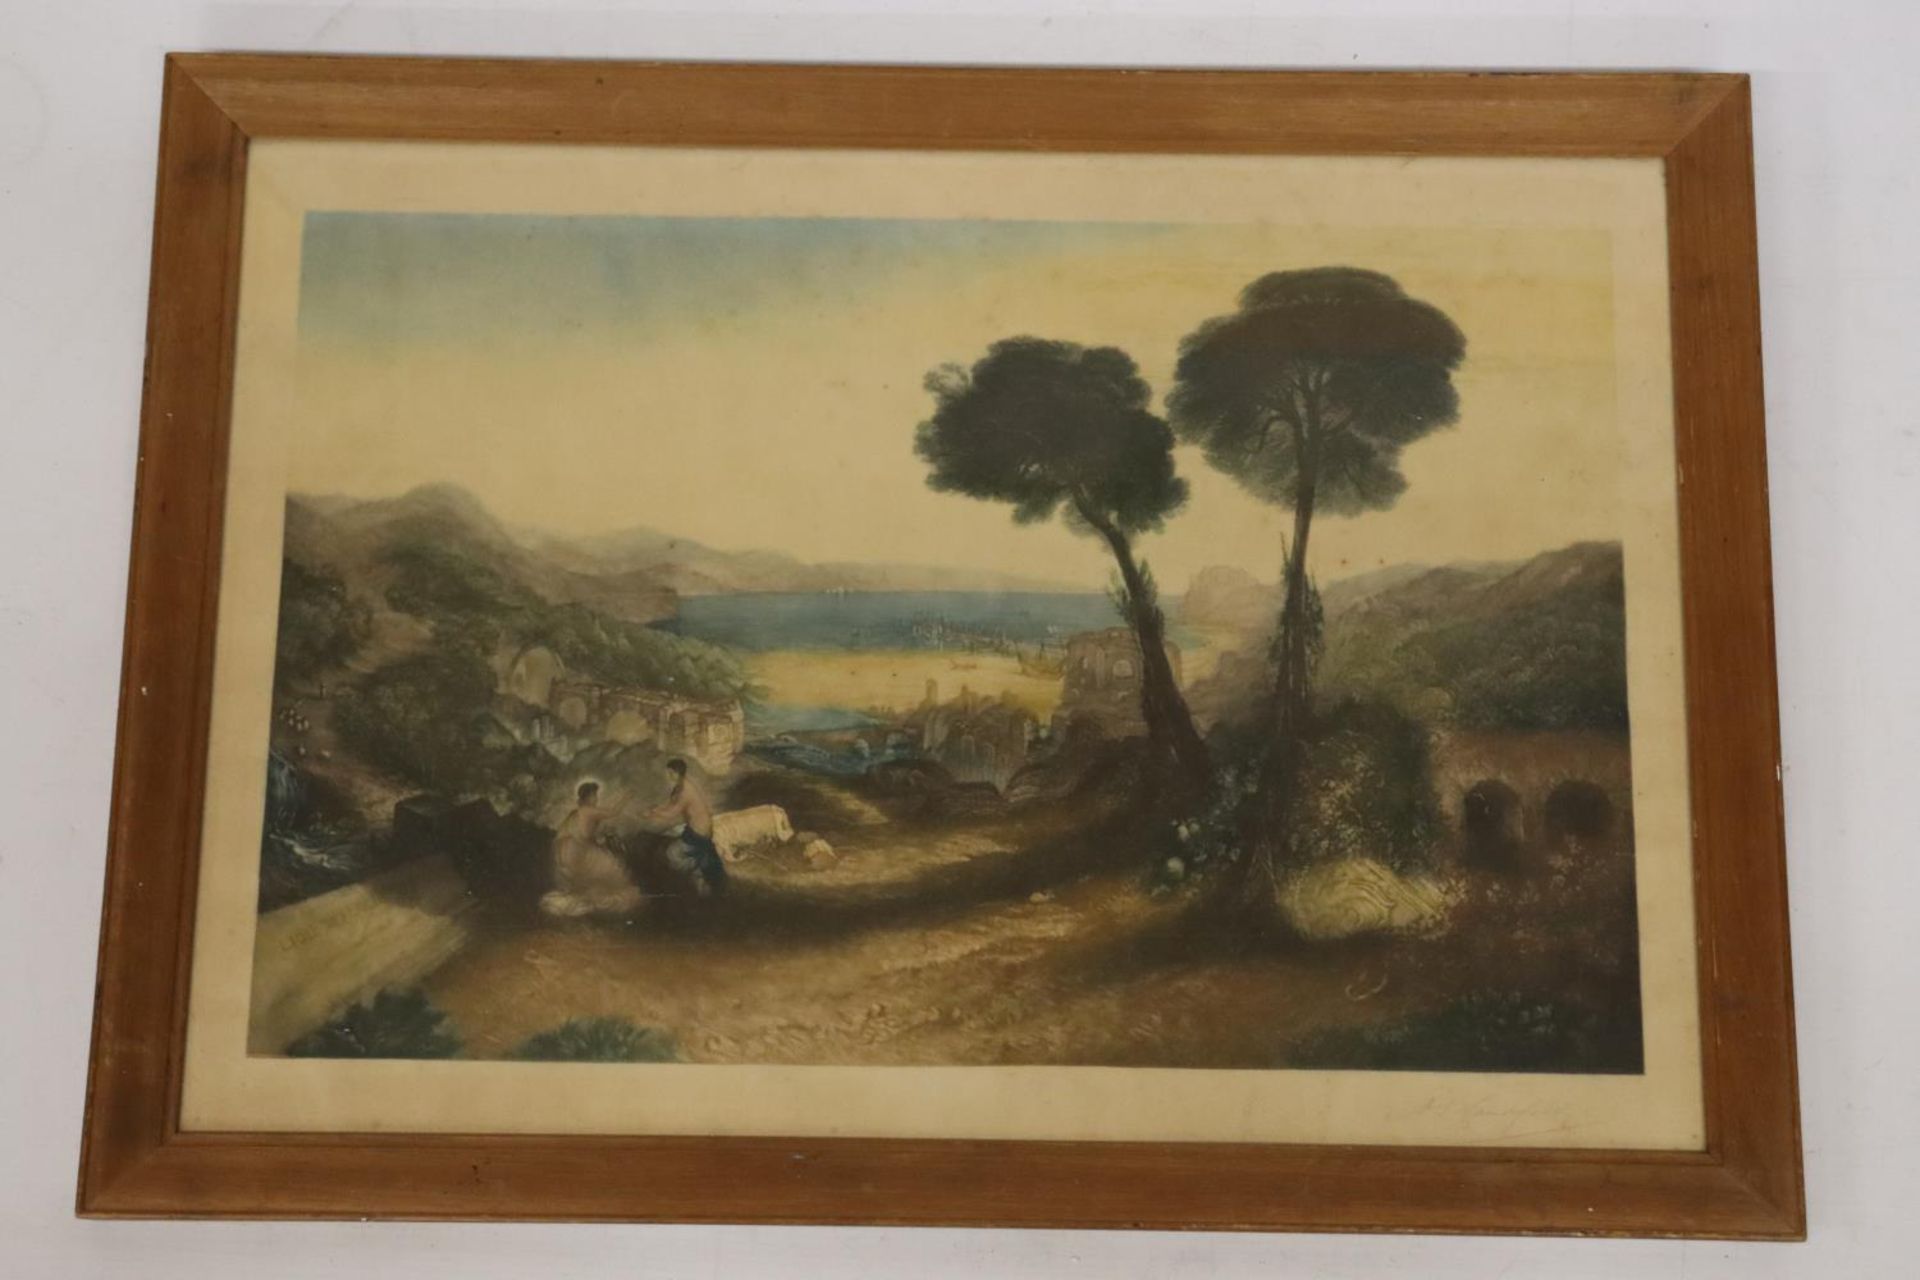 A J HANFORD BRITISH LITHOGRAPHER AND FRAMED THE BAY OF BAIAE - Image 2 of 5